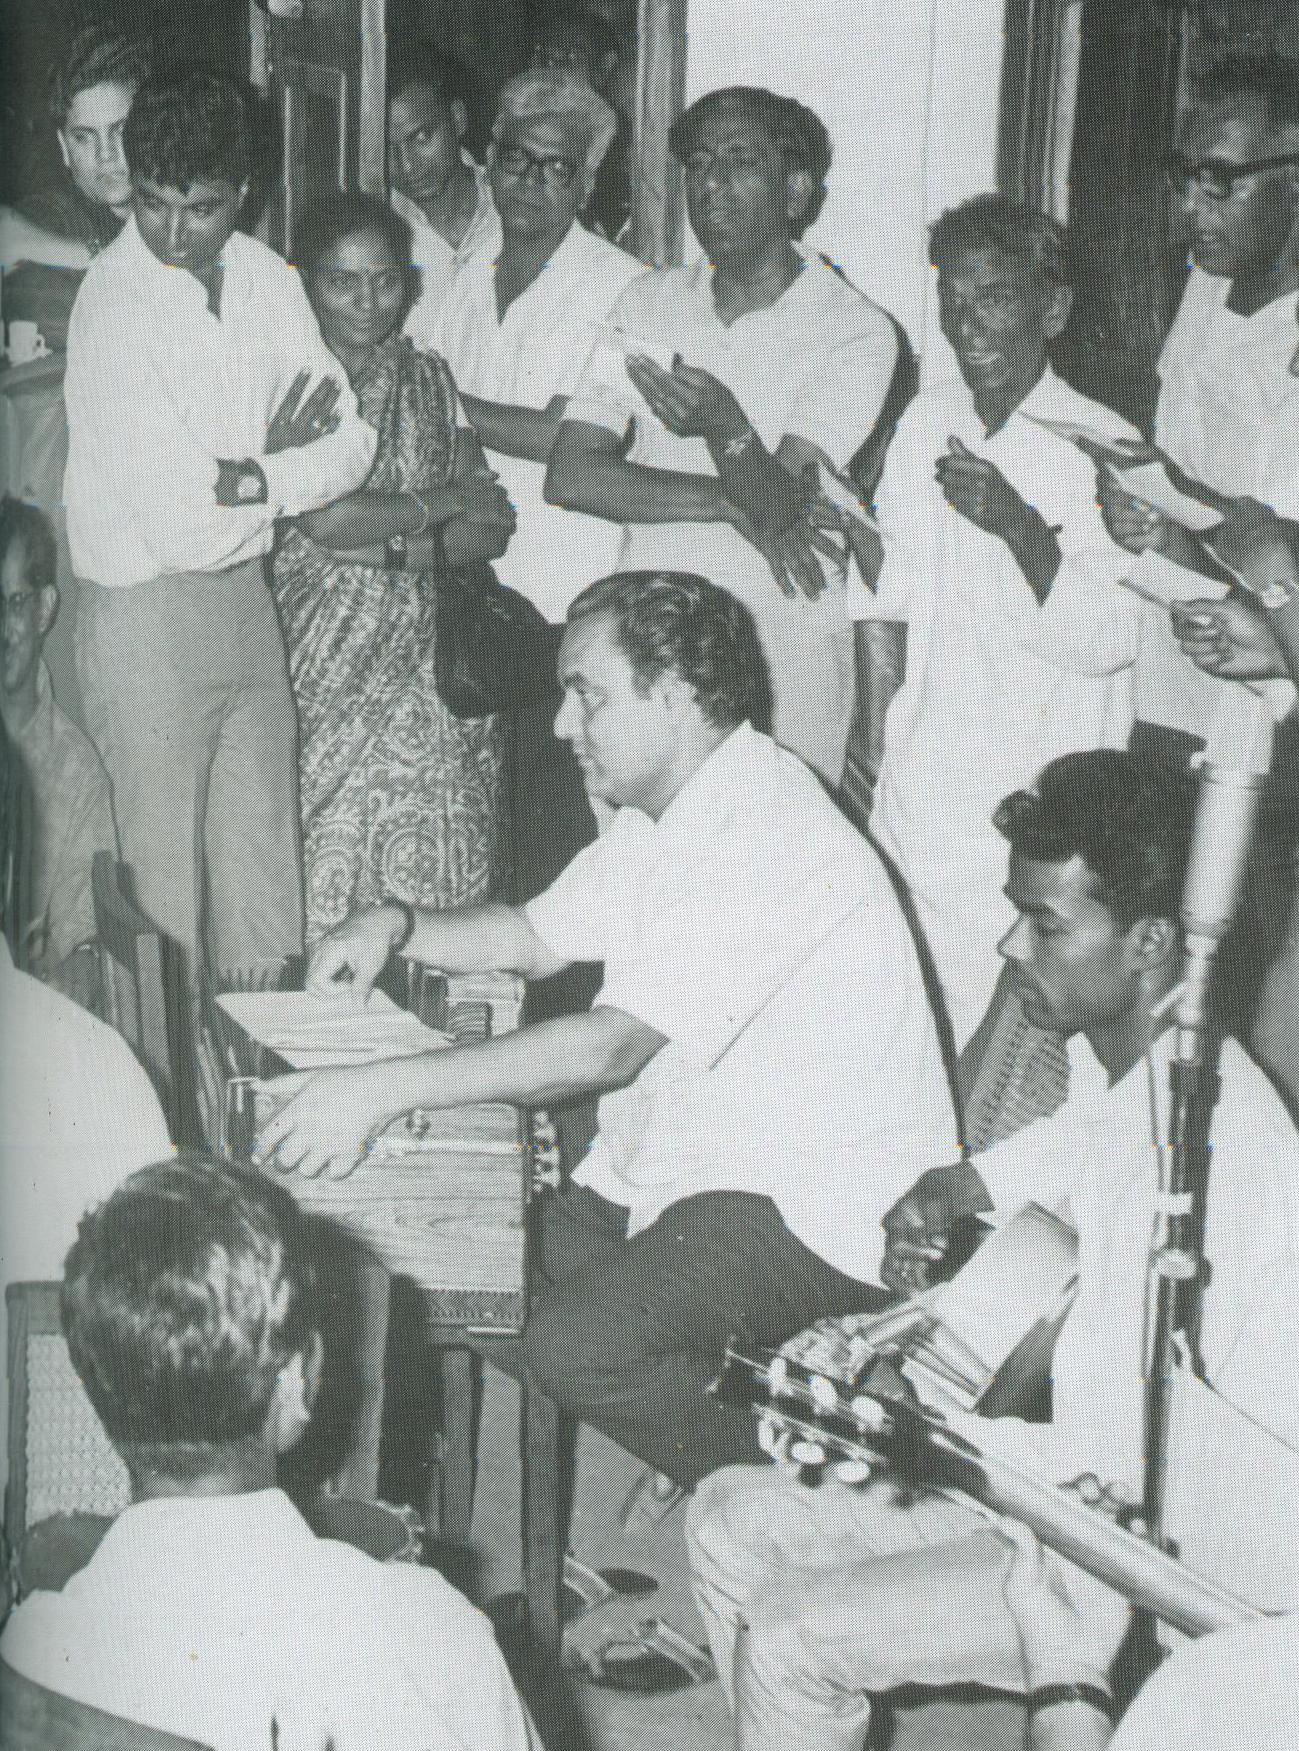 Mukesh with chorus in a song rehearsal